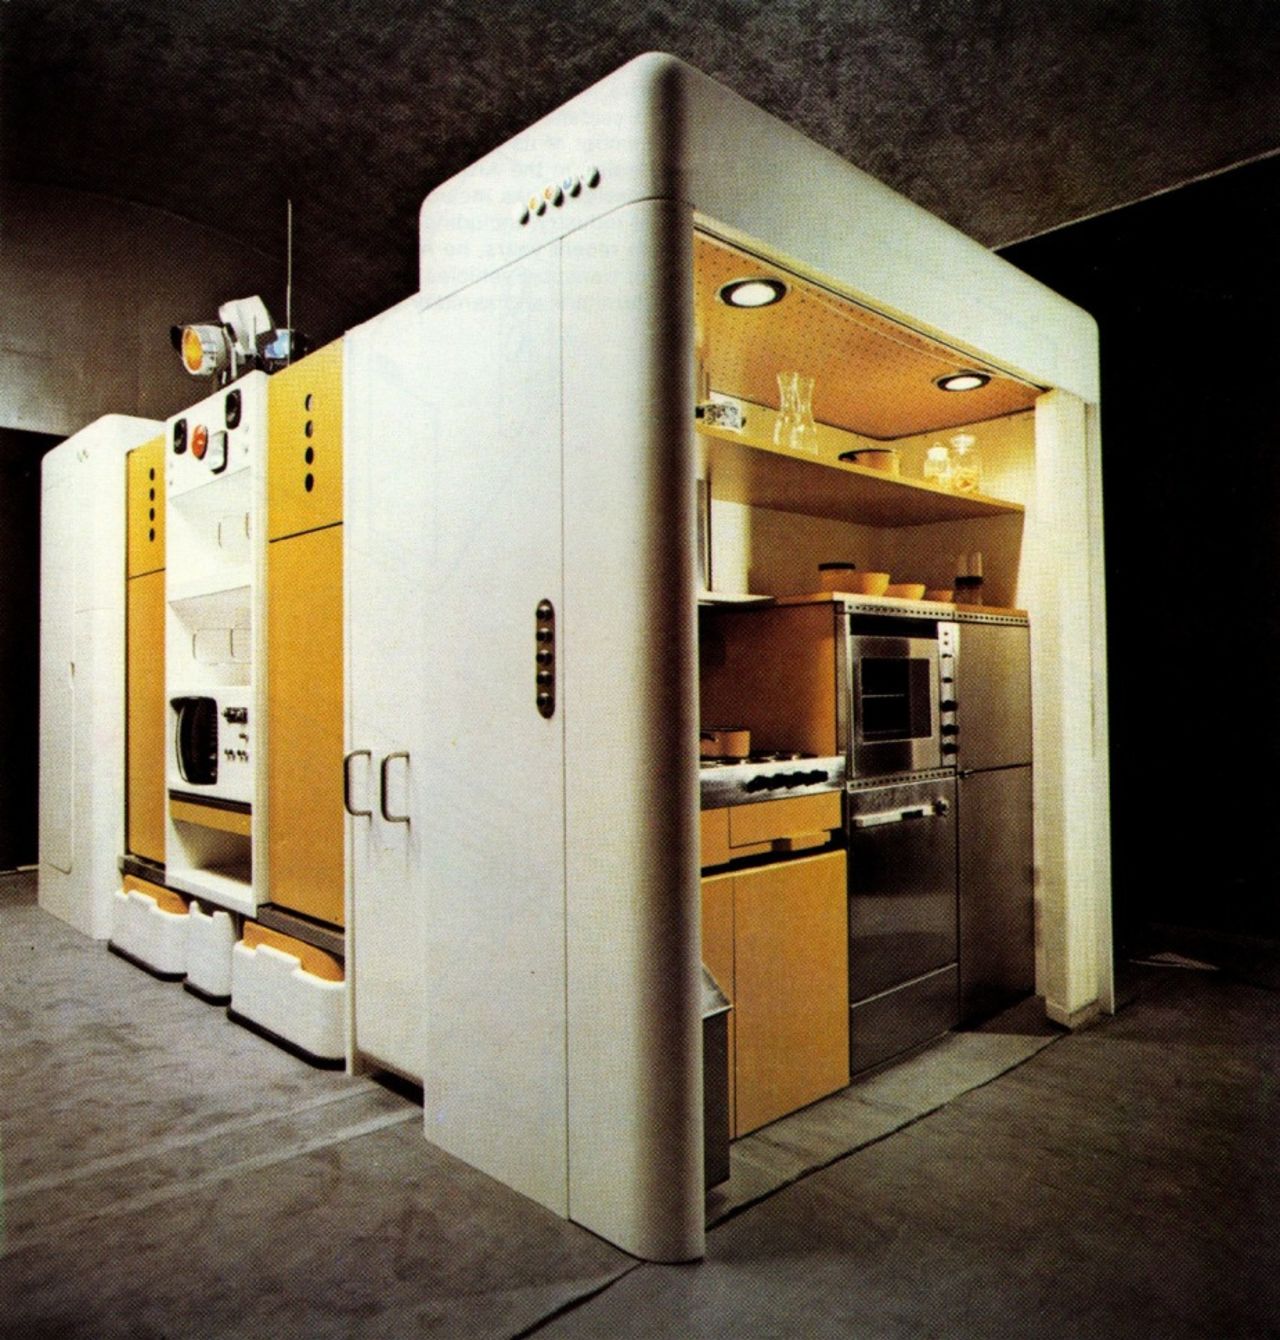 <em>By Joe Columbo, 1971</em> <br />This was seen as industrial designer Cesare "Joe" Colombo's swan song, as he died shortly after creating it. This is one realisation of Le Corbusier's modernist idea of a 'machine for living', attempting to meet all domestic needs in one compact unit.